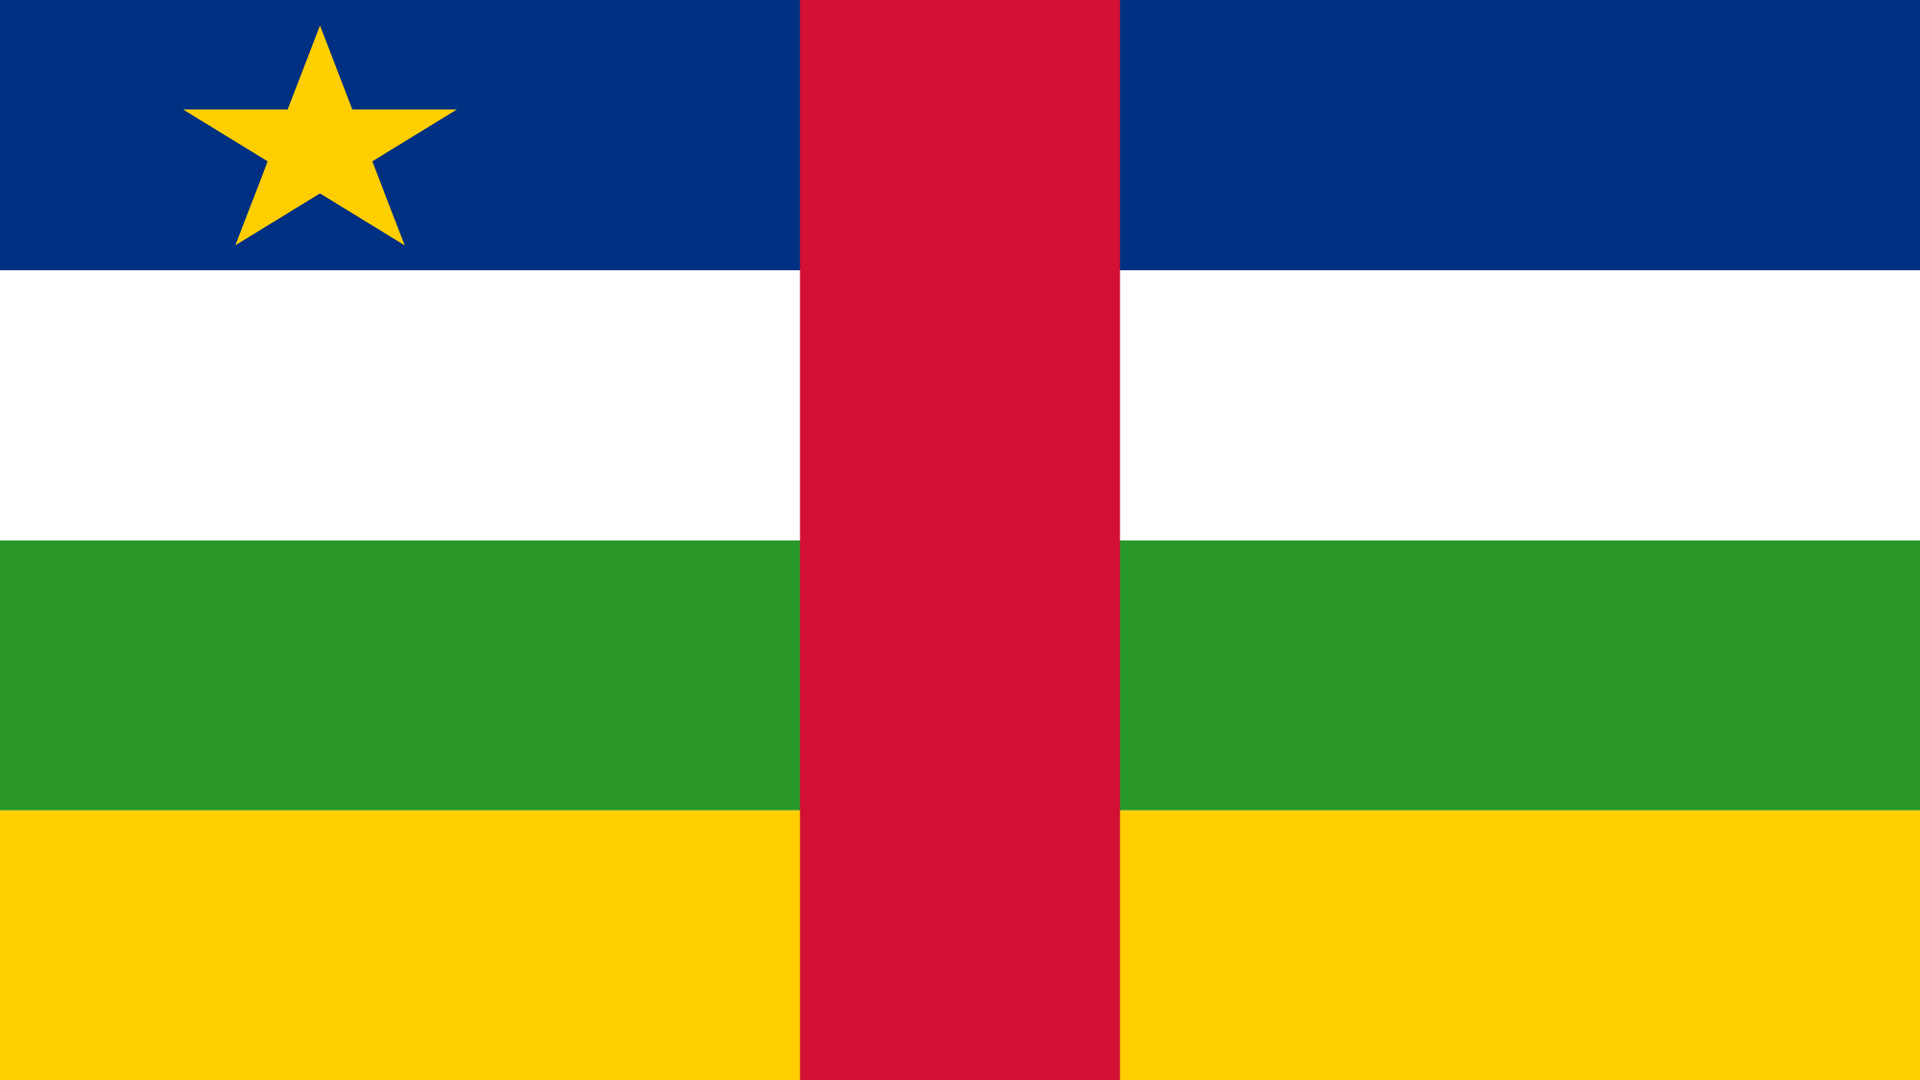 Central African Republic Flag - Wallpaper, High Definition, High Quality,  Widescreen